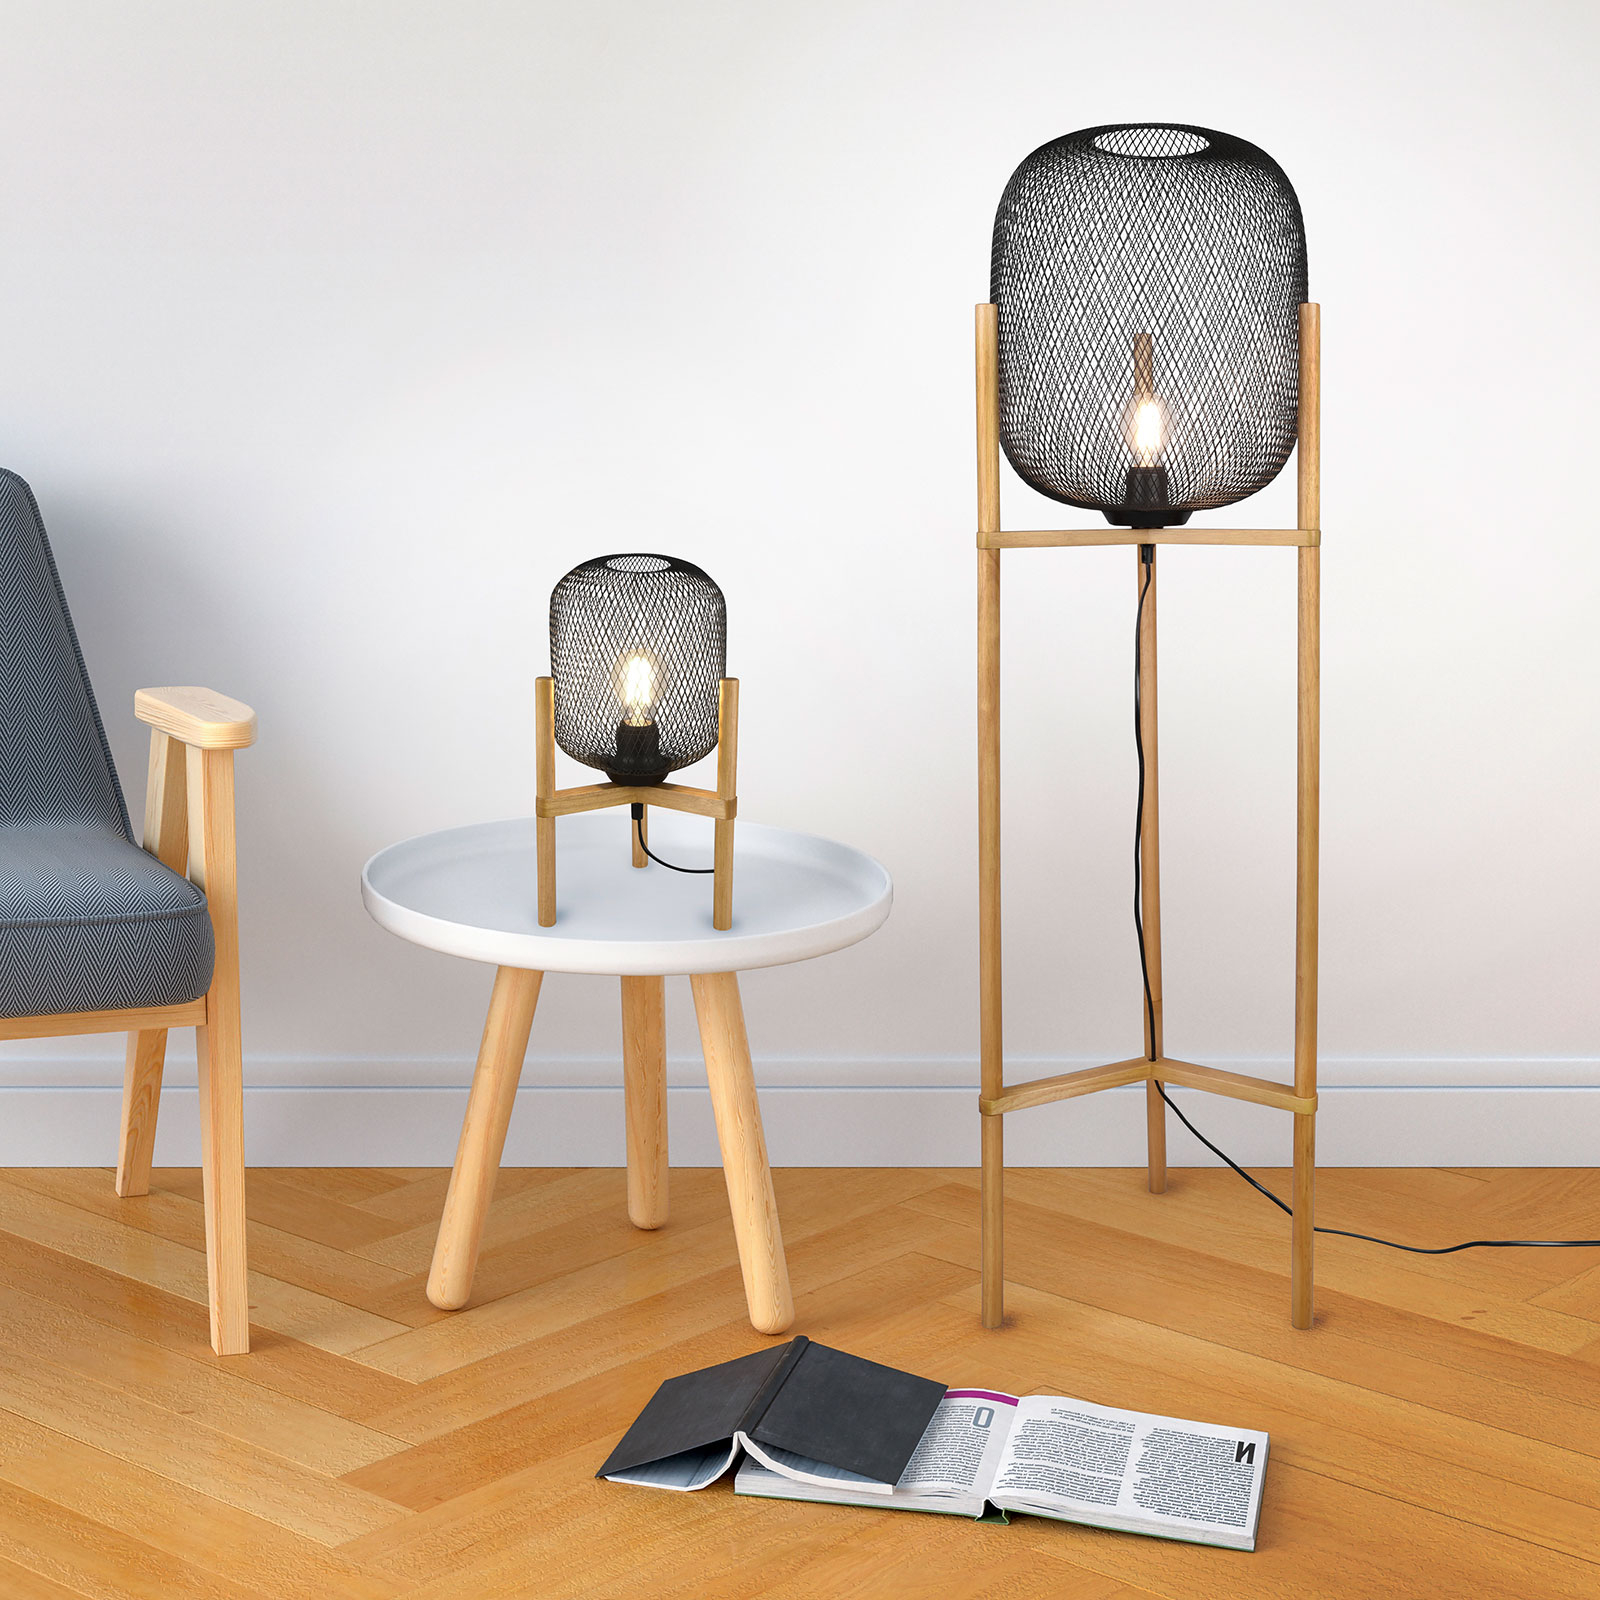 Calimero floor lamp with a tripod wooden frame